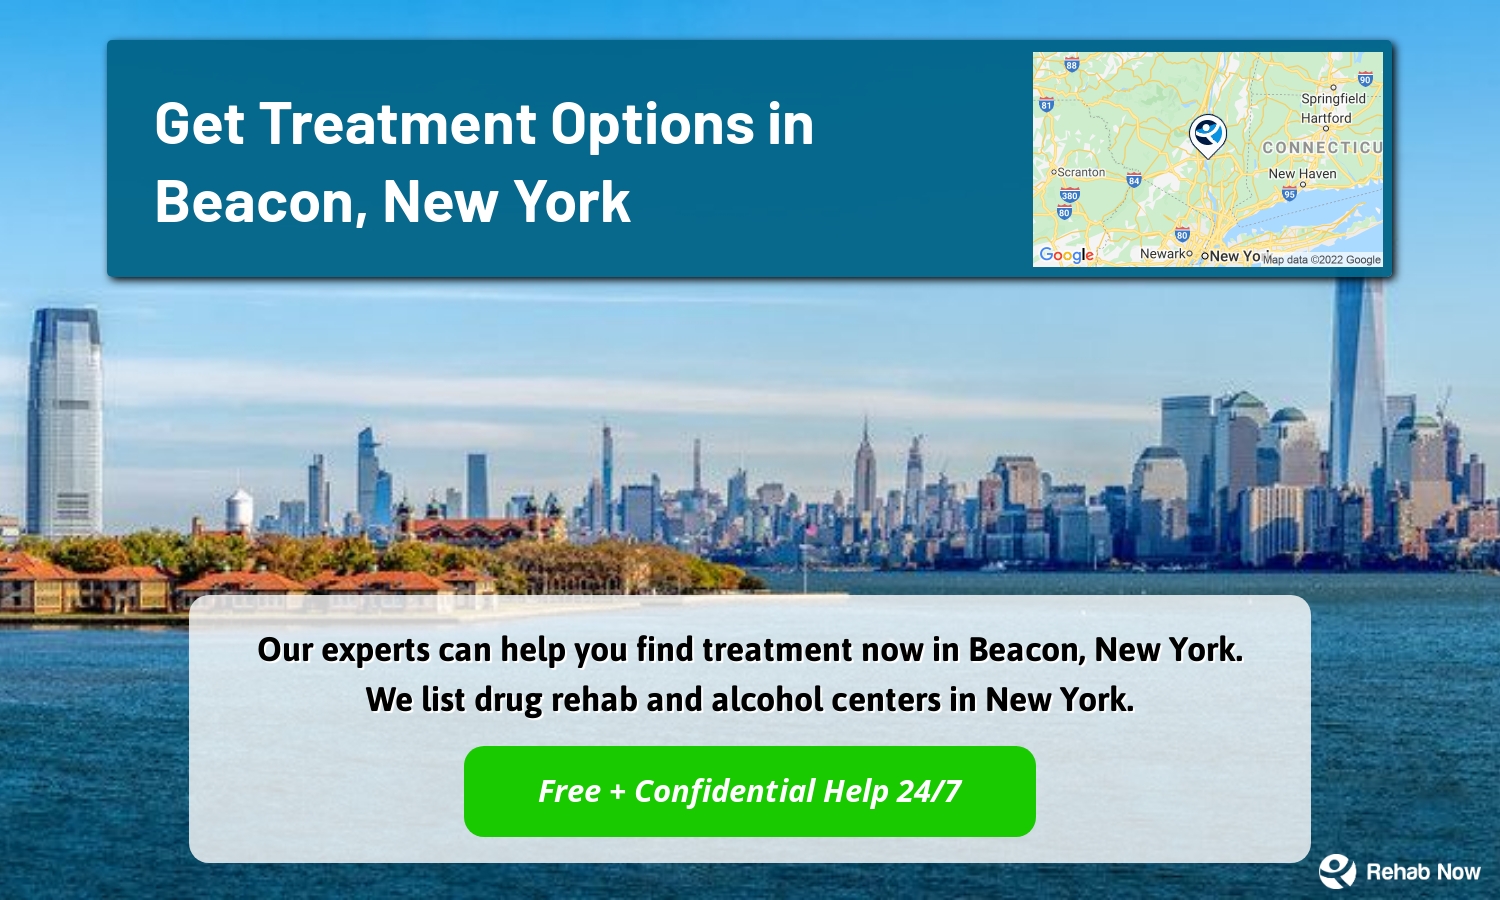 Our experts can help you find treatment now in Beacon, New York. We list drug rehab and alcohol centers in New York.